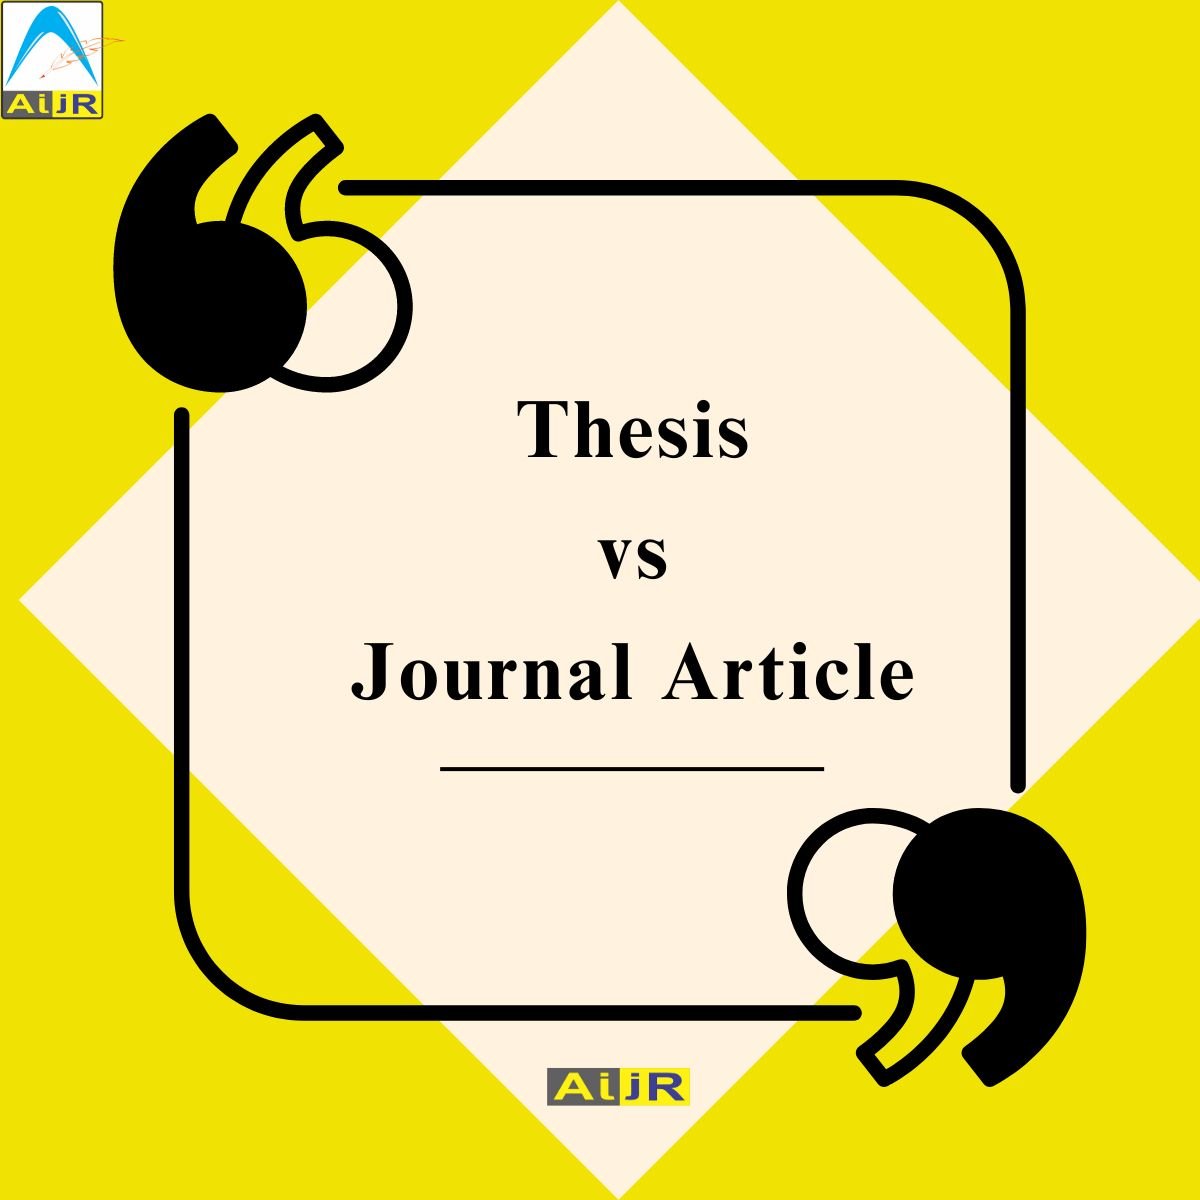 is a thesis a journal article